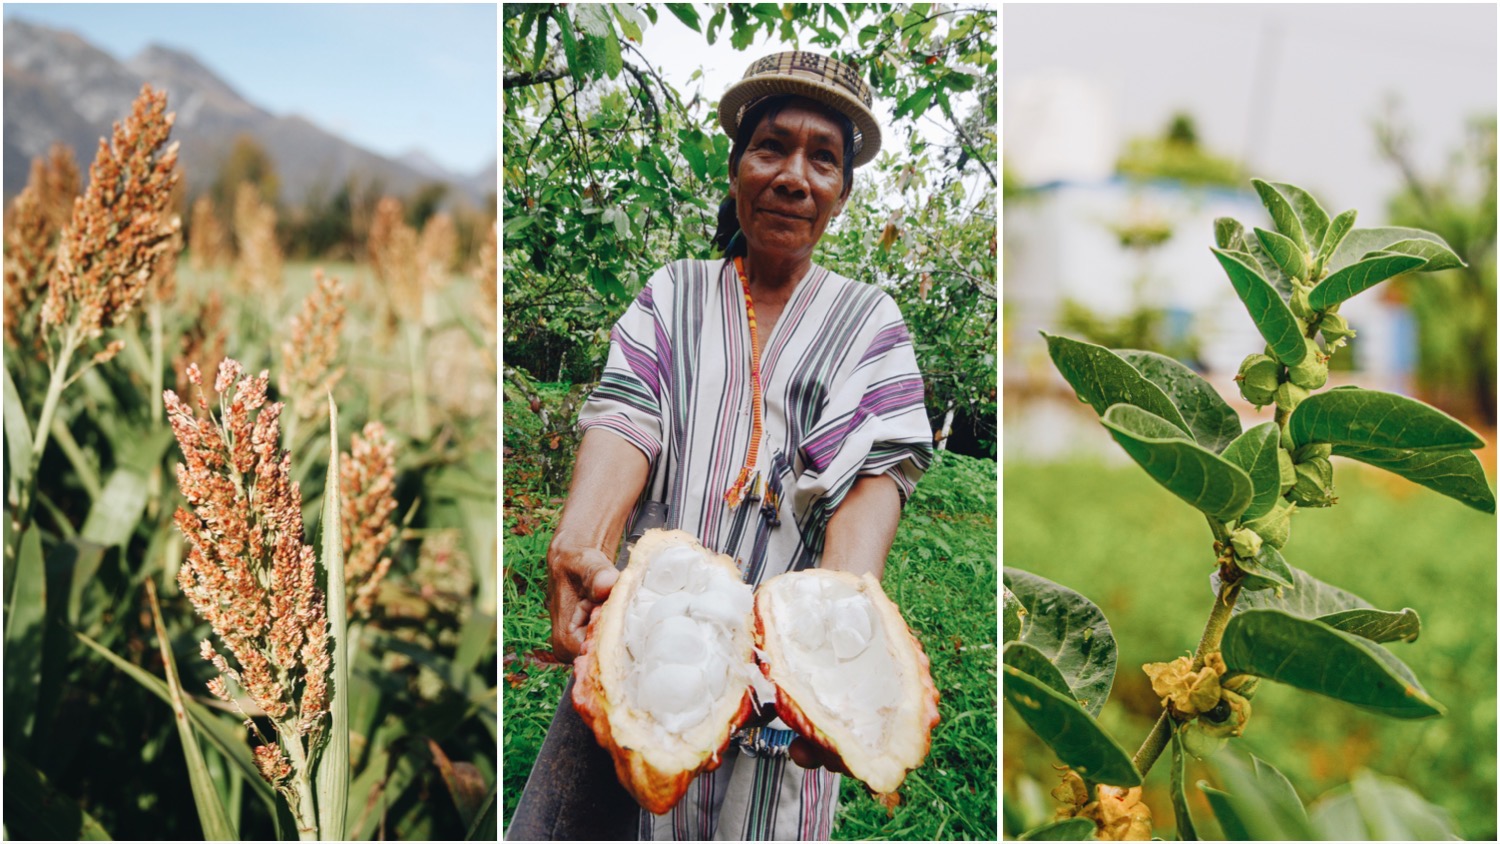 Split image features two photos of superfood plants, sorghum (left), and ashwagandha (right), with the Ashaninka tribe's Tomas Bardales holding organic cocoa fruit (center).